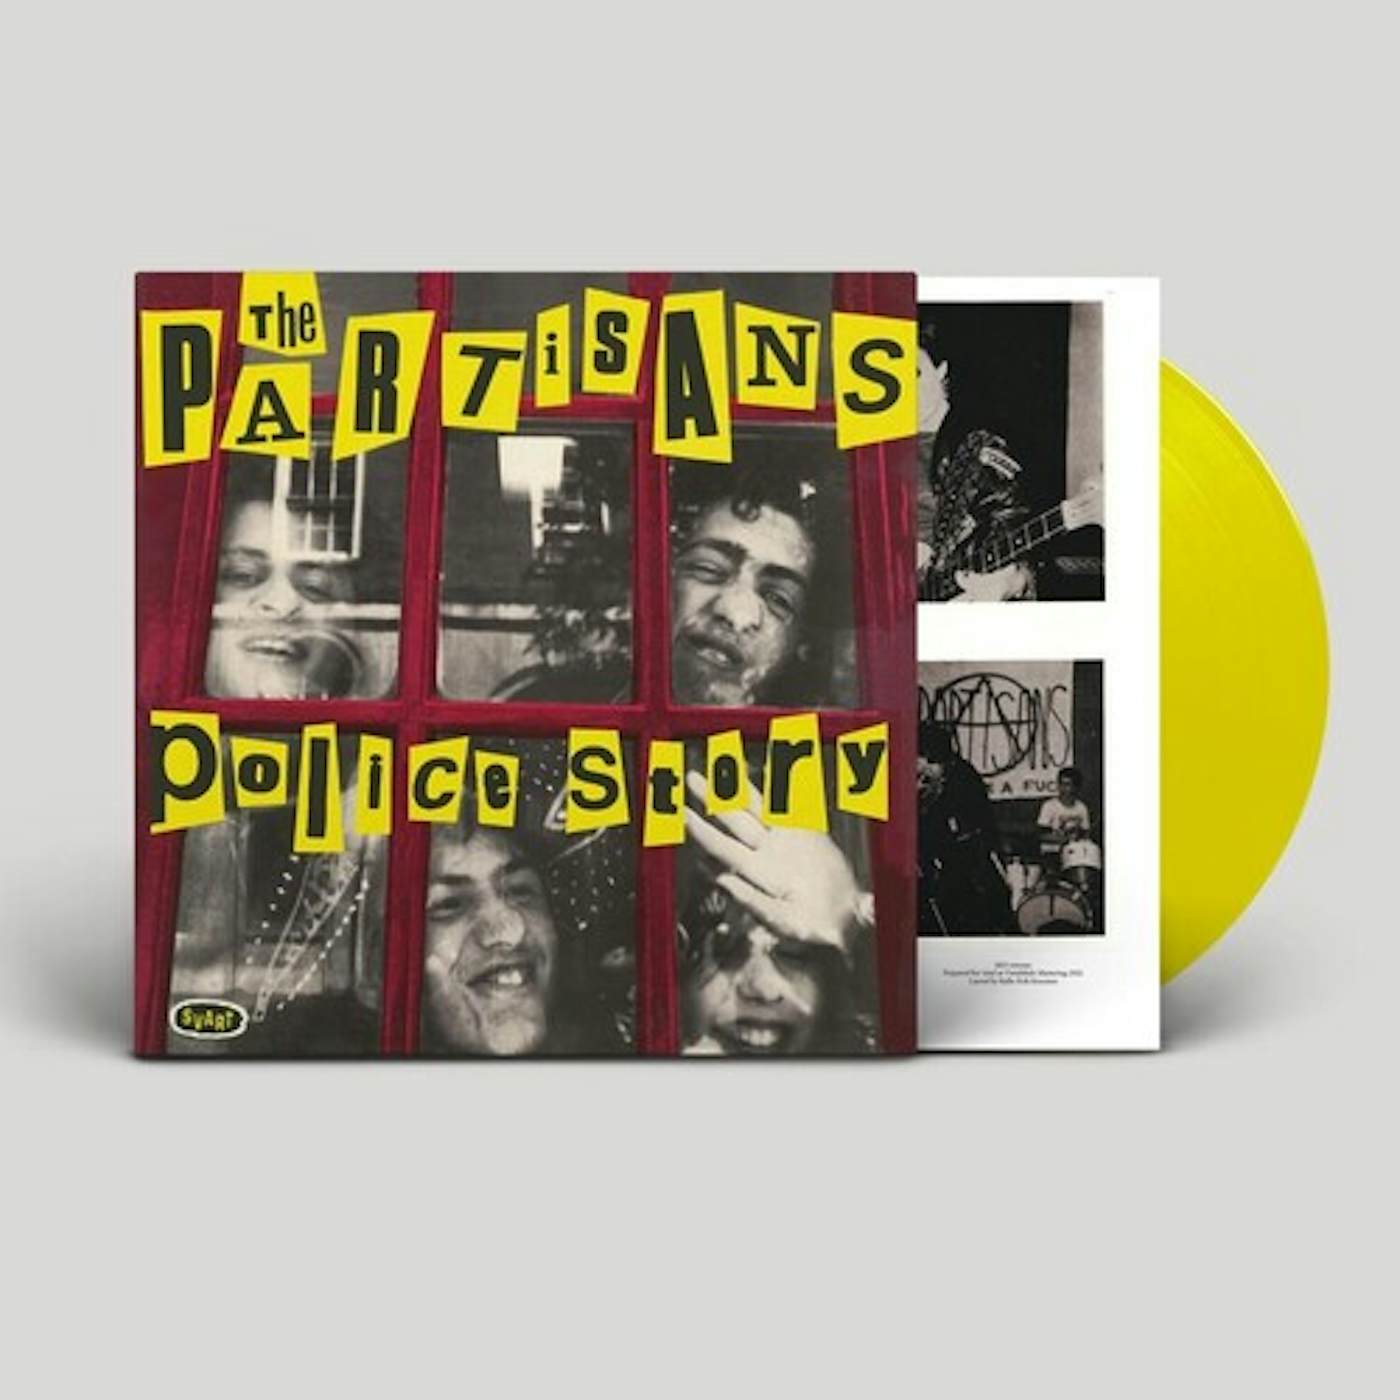 The Partisans Police Story Vinyl Record